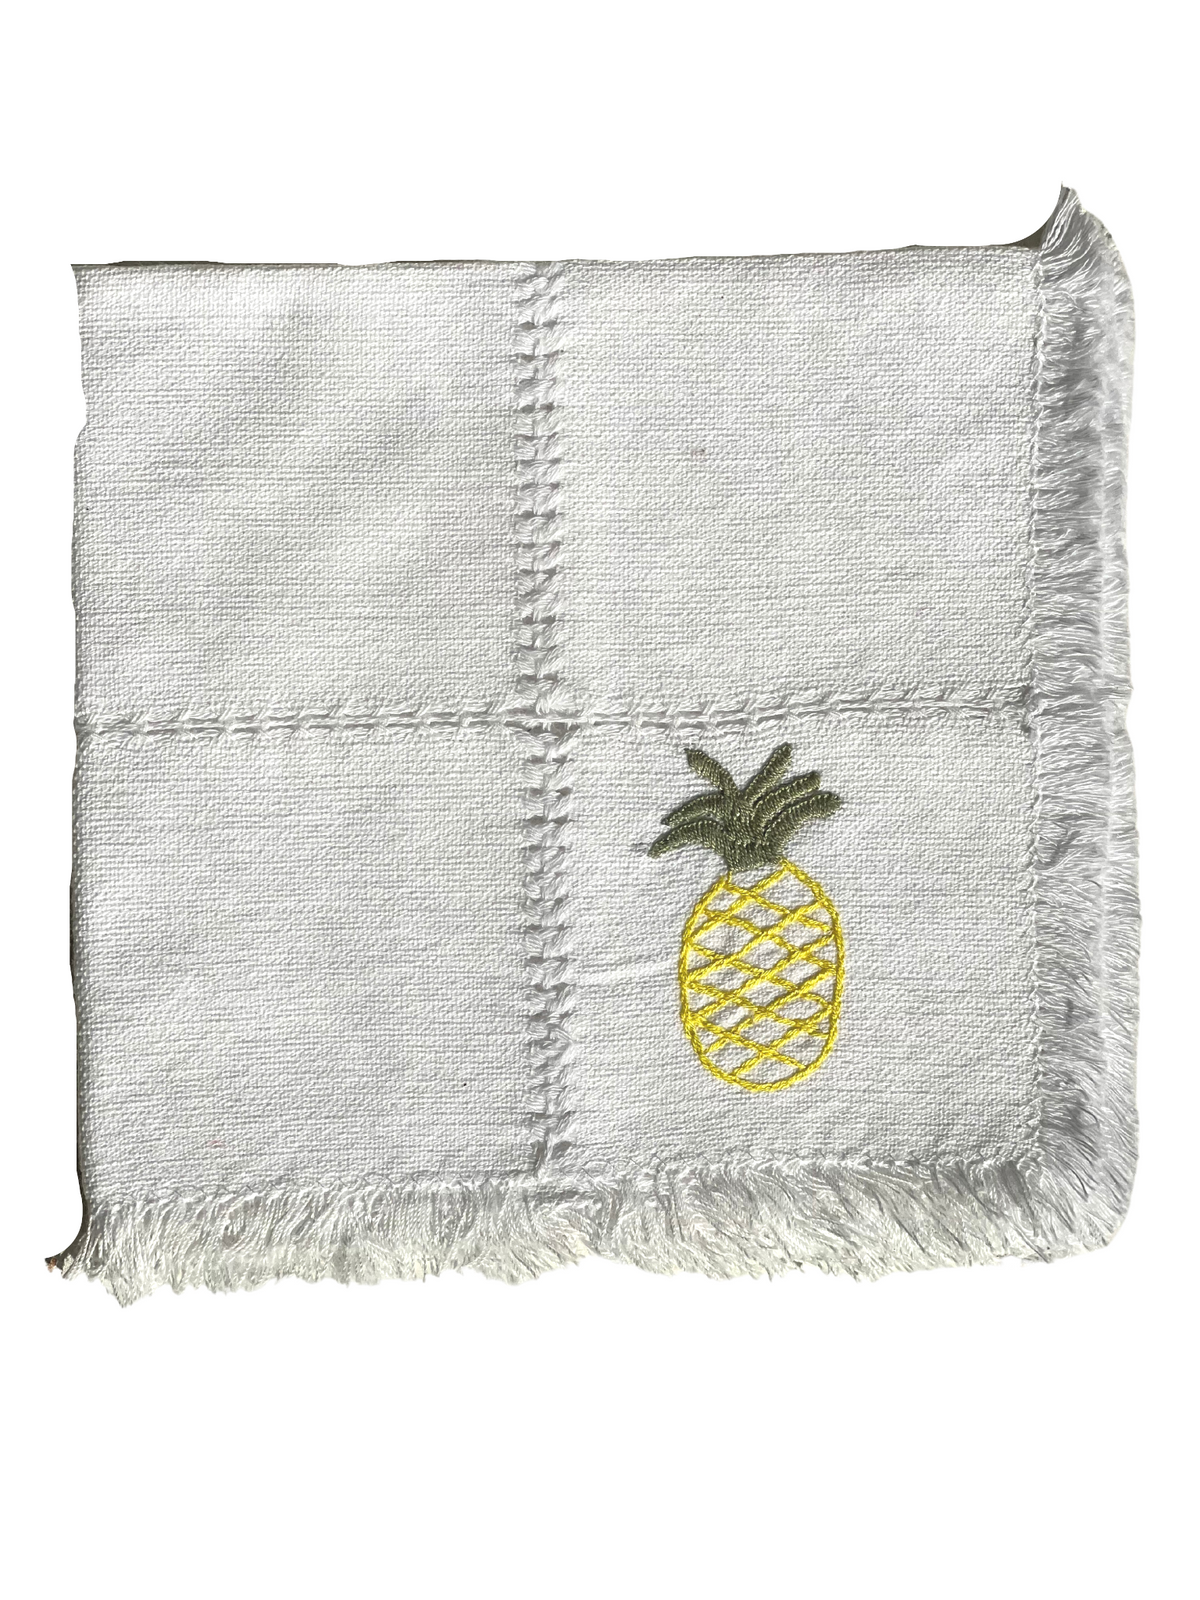 Cotton Dinner Napkin with Hand Stitched Pineapple - Charleston Collection